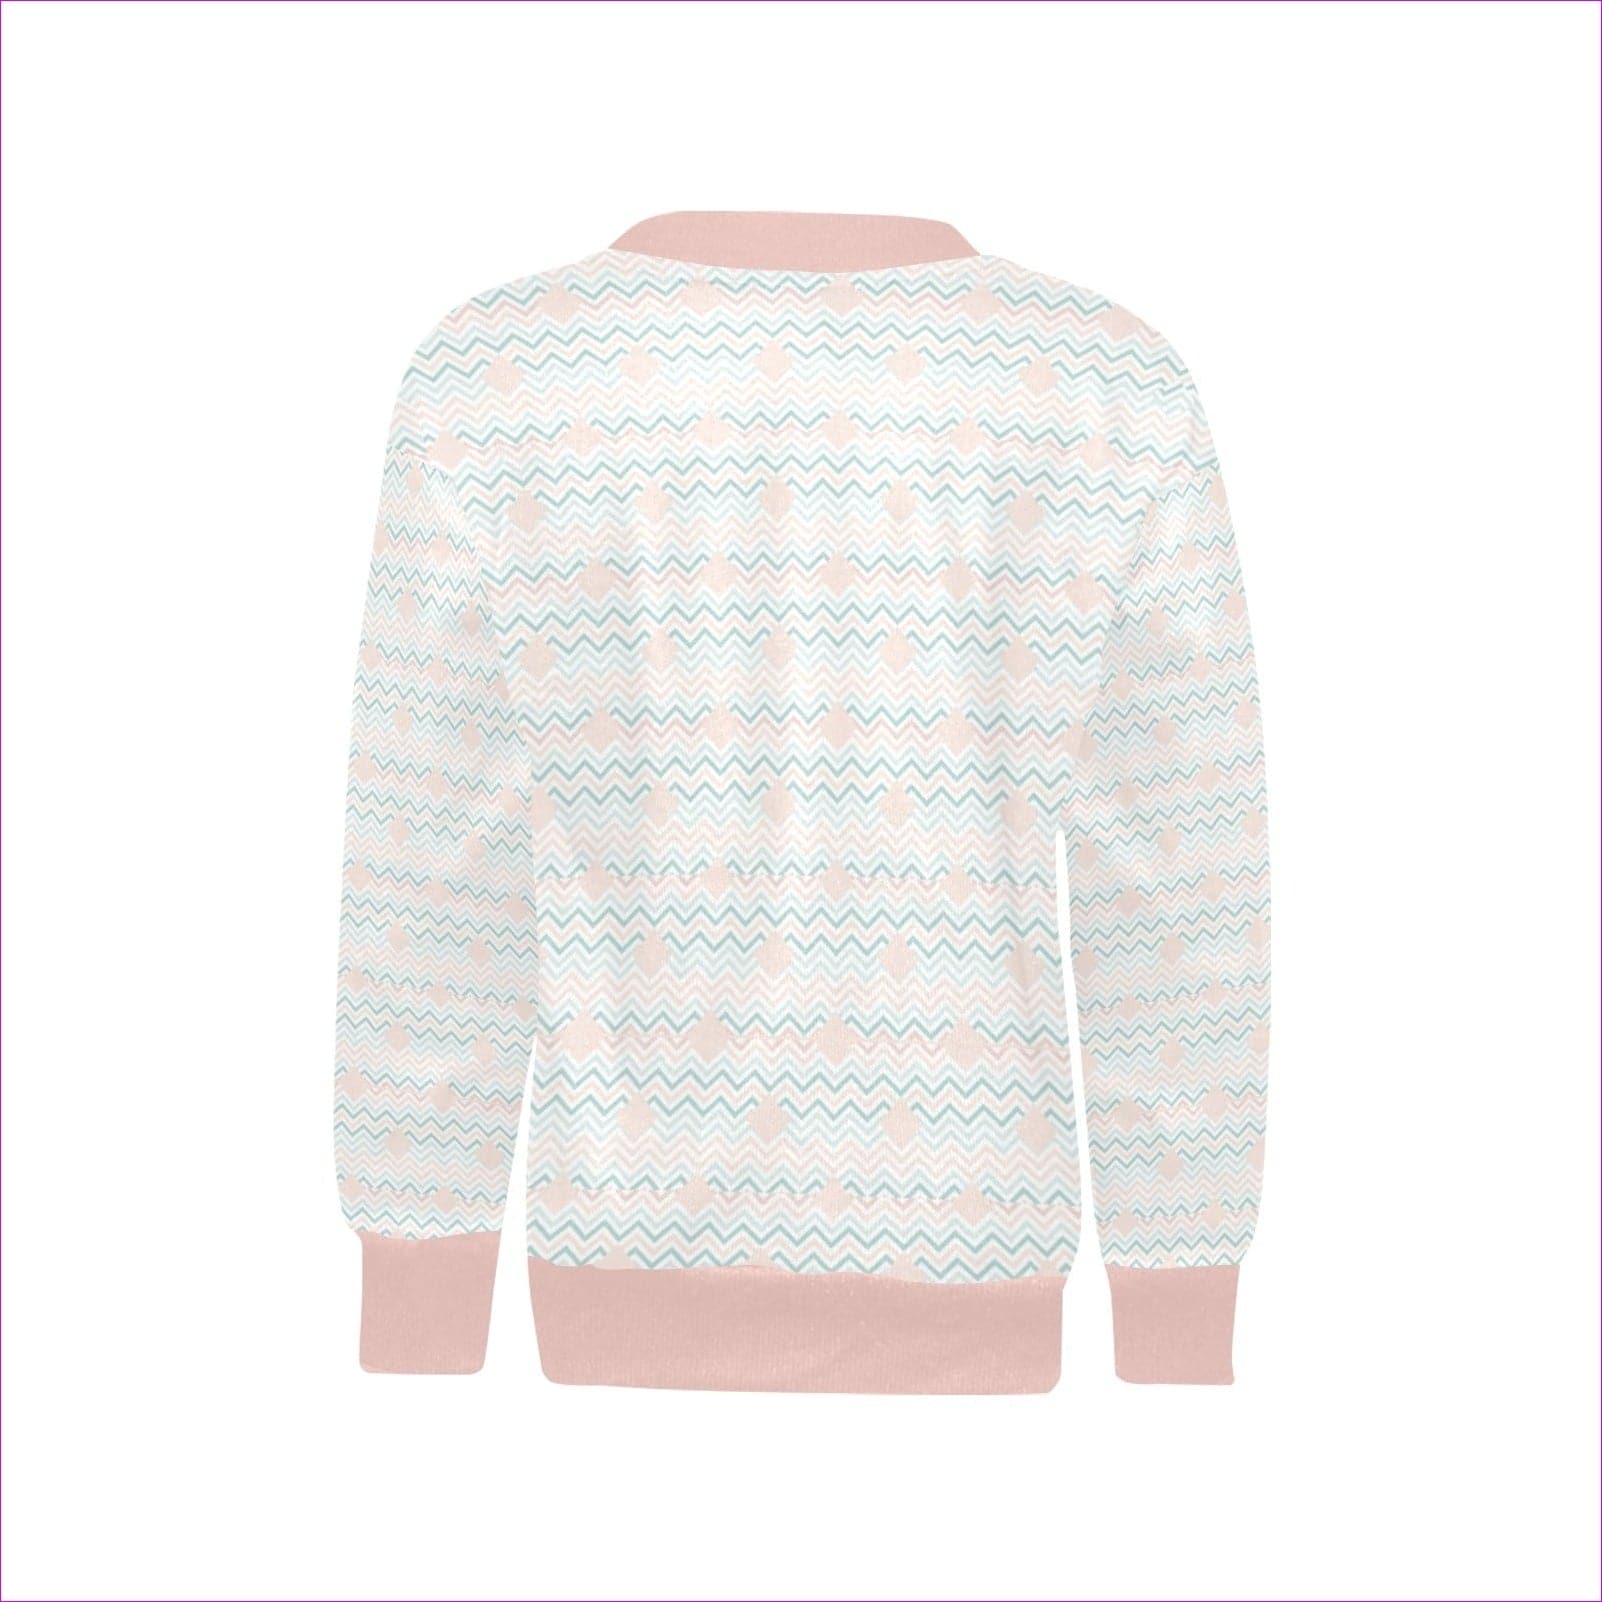 White/Pink XL Easy Days Girls' V-Neck Sweater - kid's sweater at TFC&H Co.